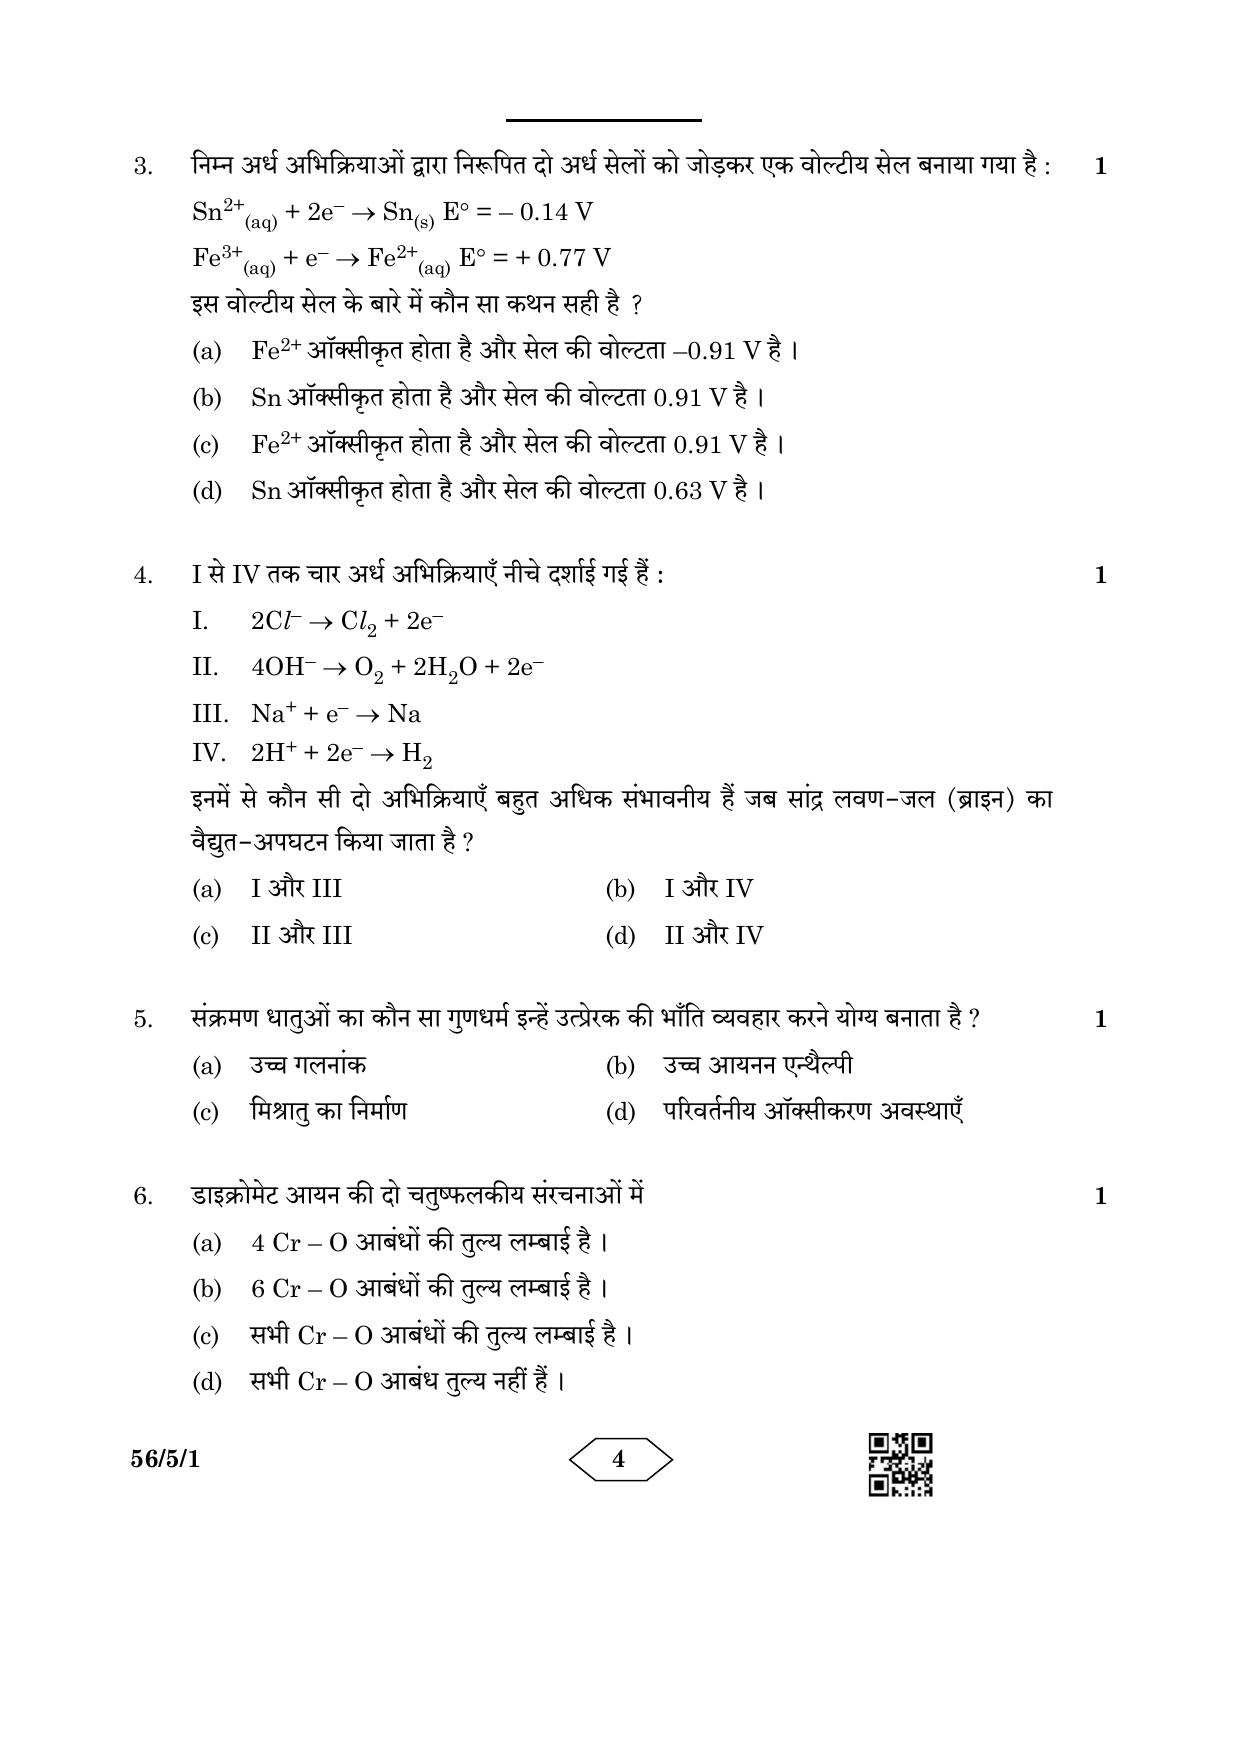 CBSE Class 12 56-5-1 Chemistry 2023 Question Paper - Page 4